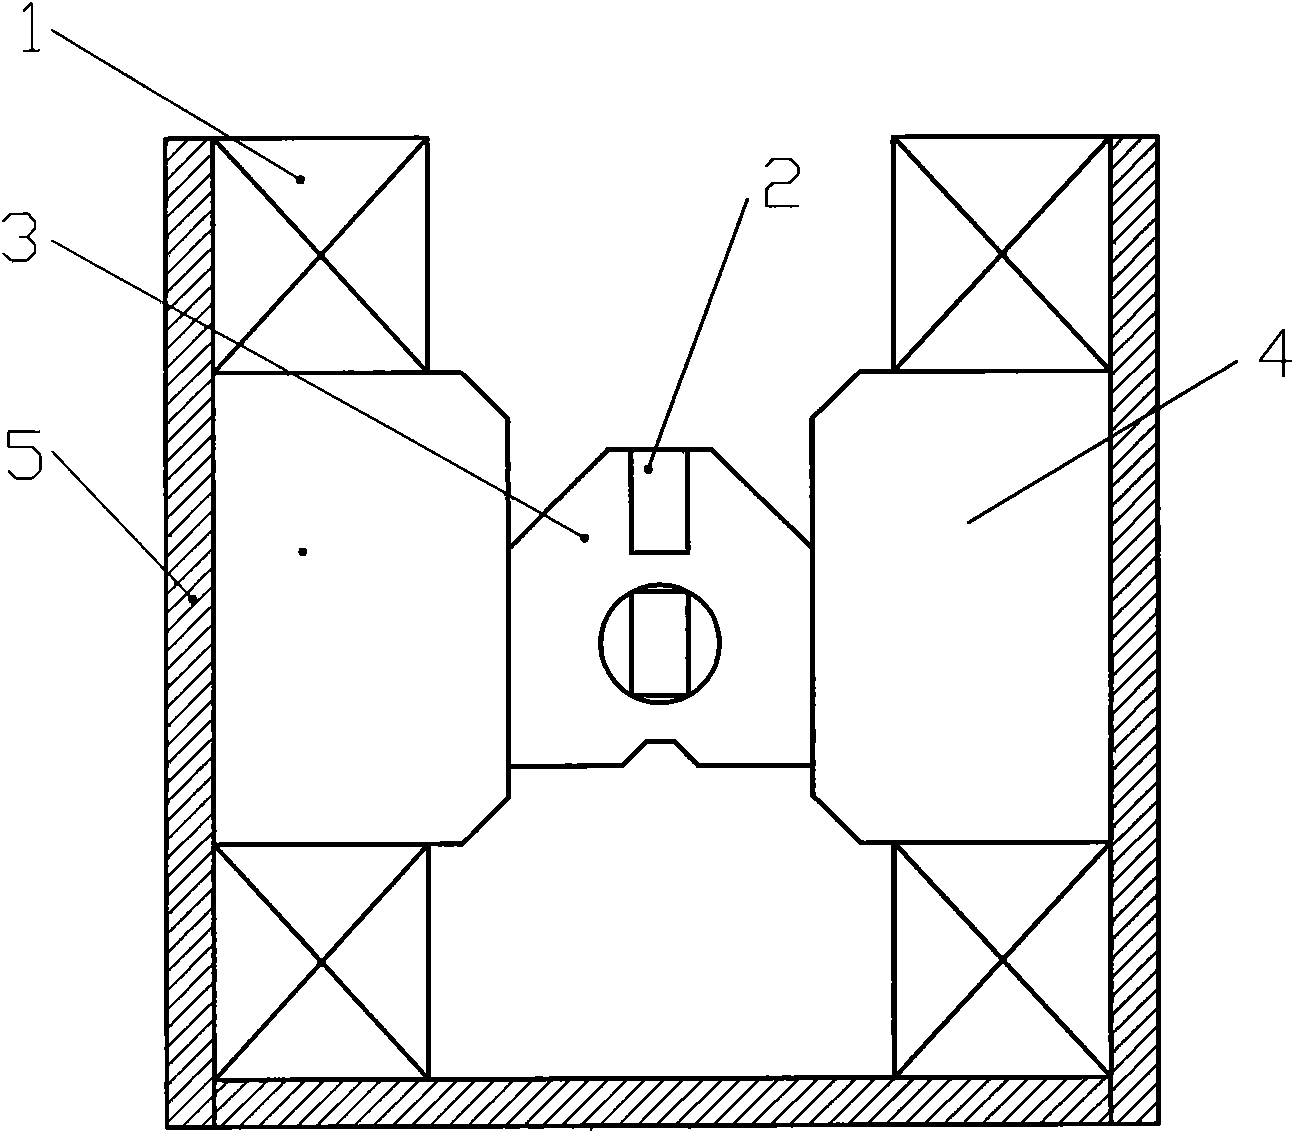 Method for magnetizing magnetic component of permanent magnetic crane